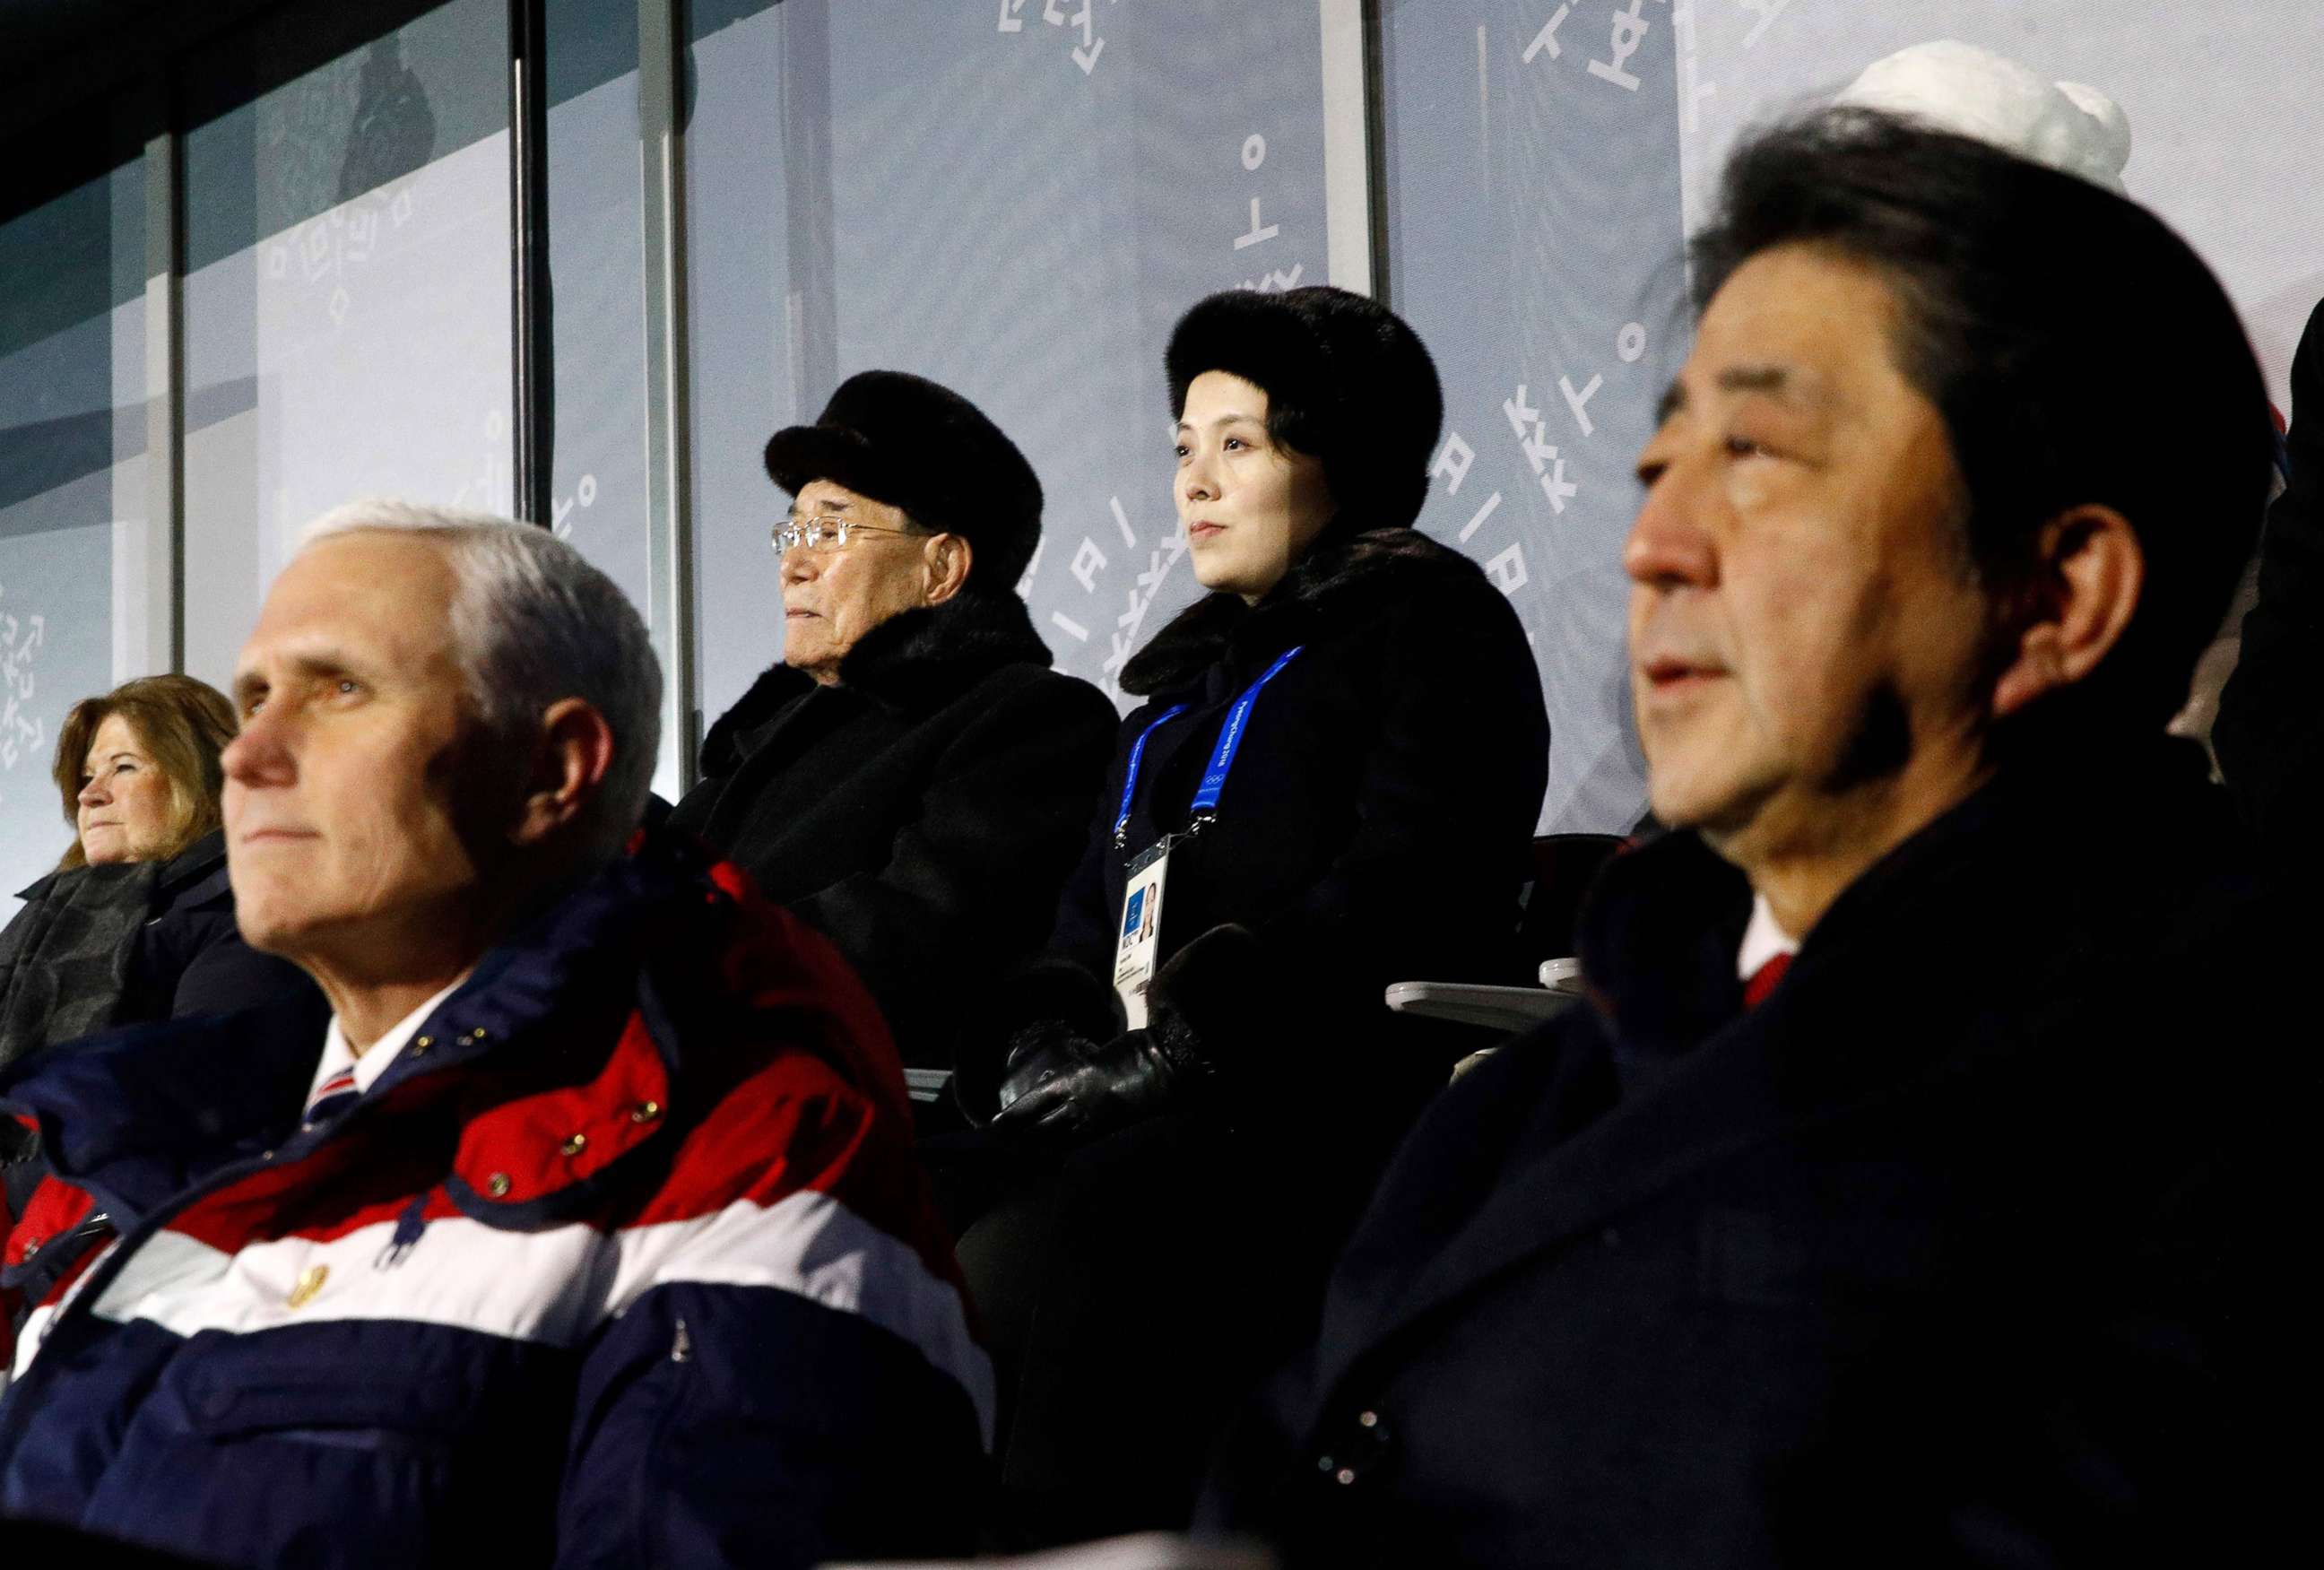 PHOTO: Vice President Mike Pence, Japan's Prime Minister Shinzo Abe, North Korea's ceremonial head of state Kim Yong Nam (back L) and Kim Jong Un's sister Kim Yo Jong watch the opening ceremony of the Pyeongchang 2018 Winter Olympic Games Feb. 9, 2018.